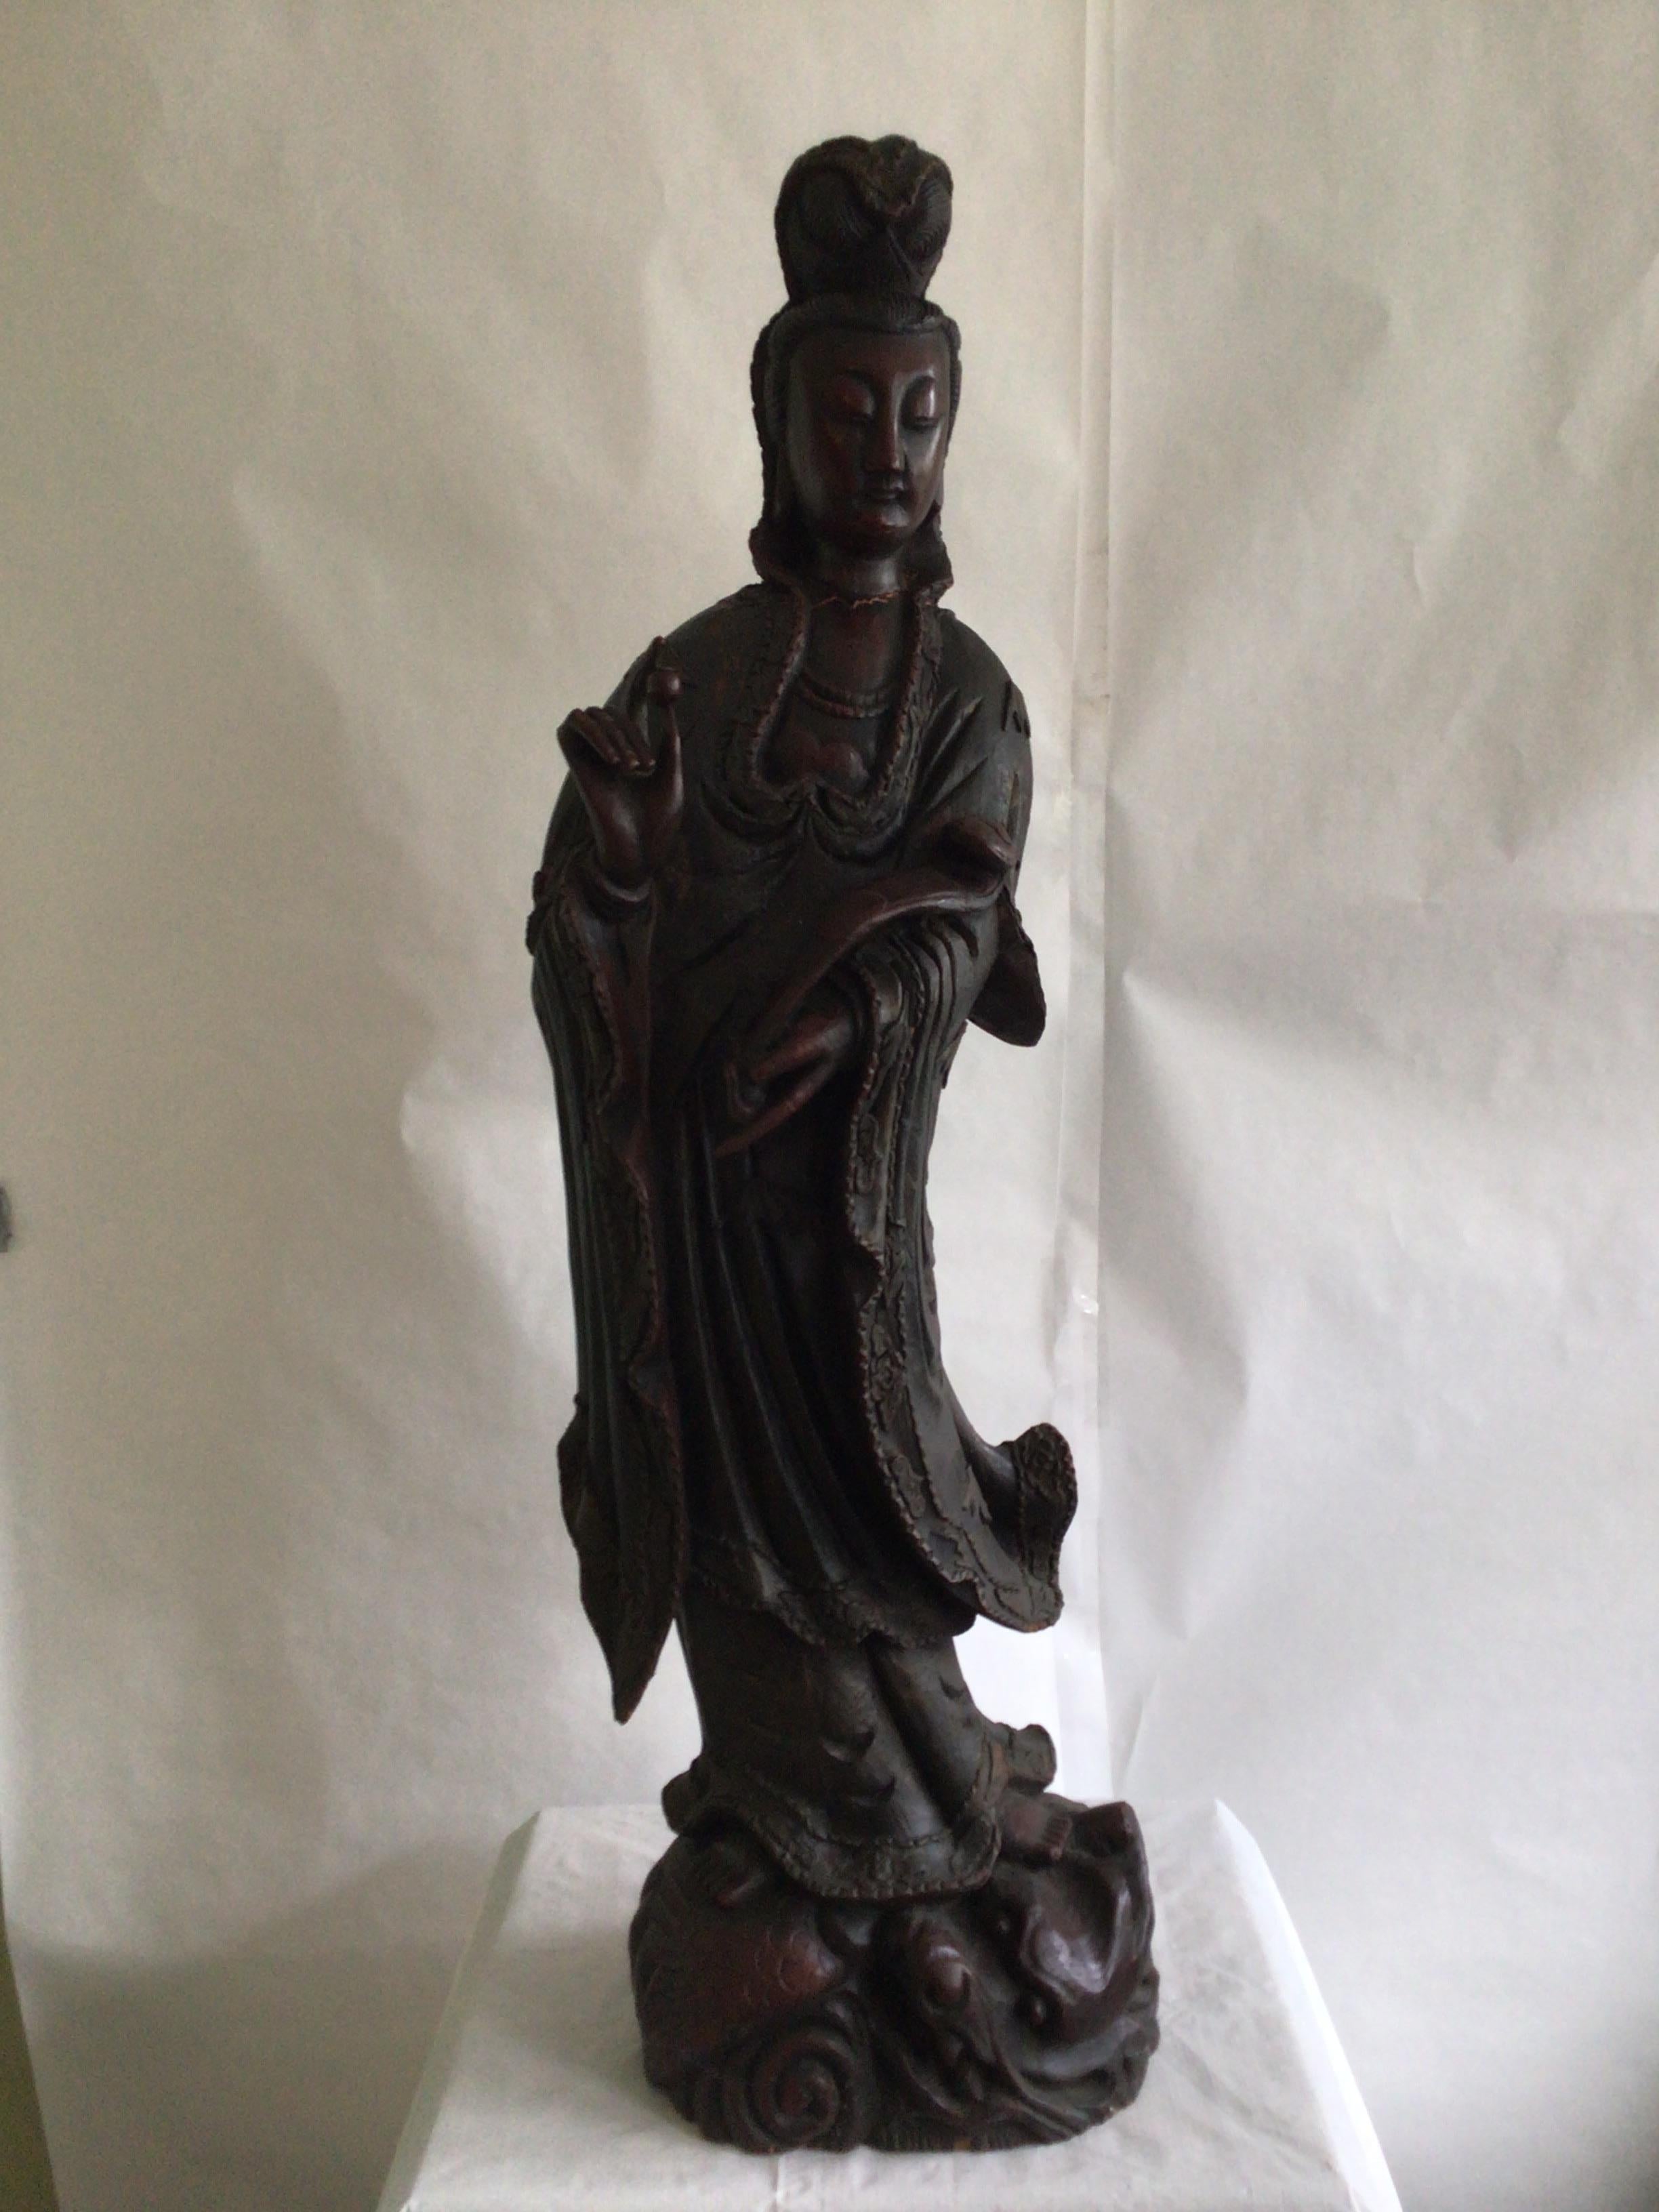 1920s Carved Wood Guanyin Statue
Beautifully fine carving details
Damage shown in pictures
Crack in neck